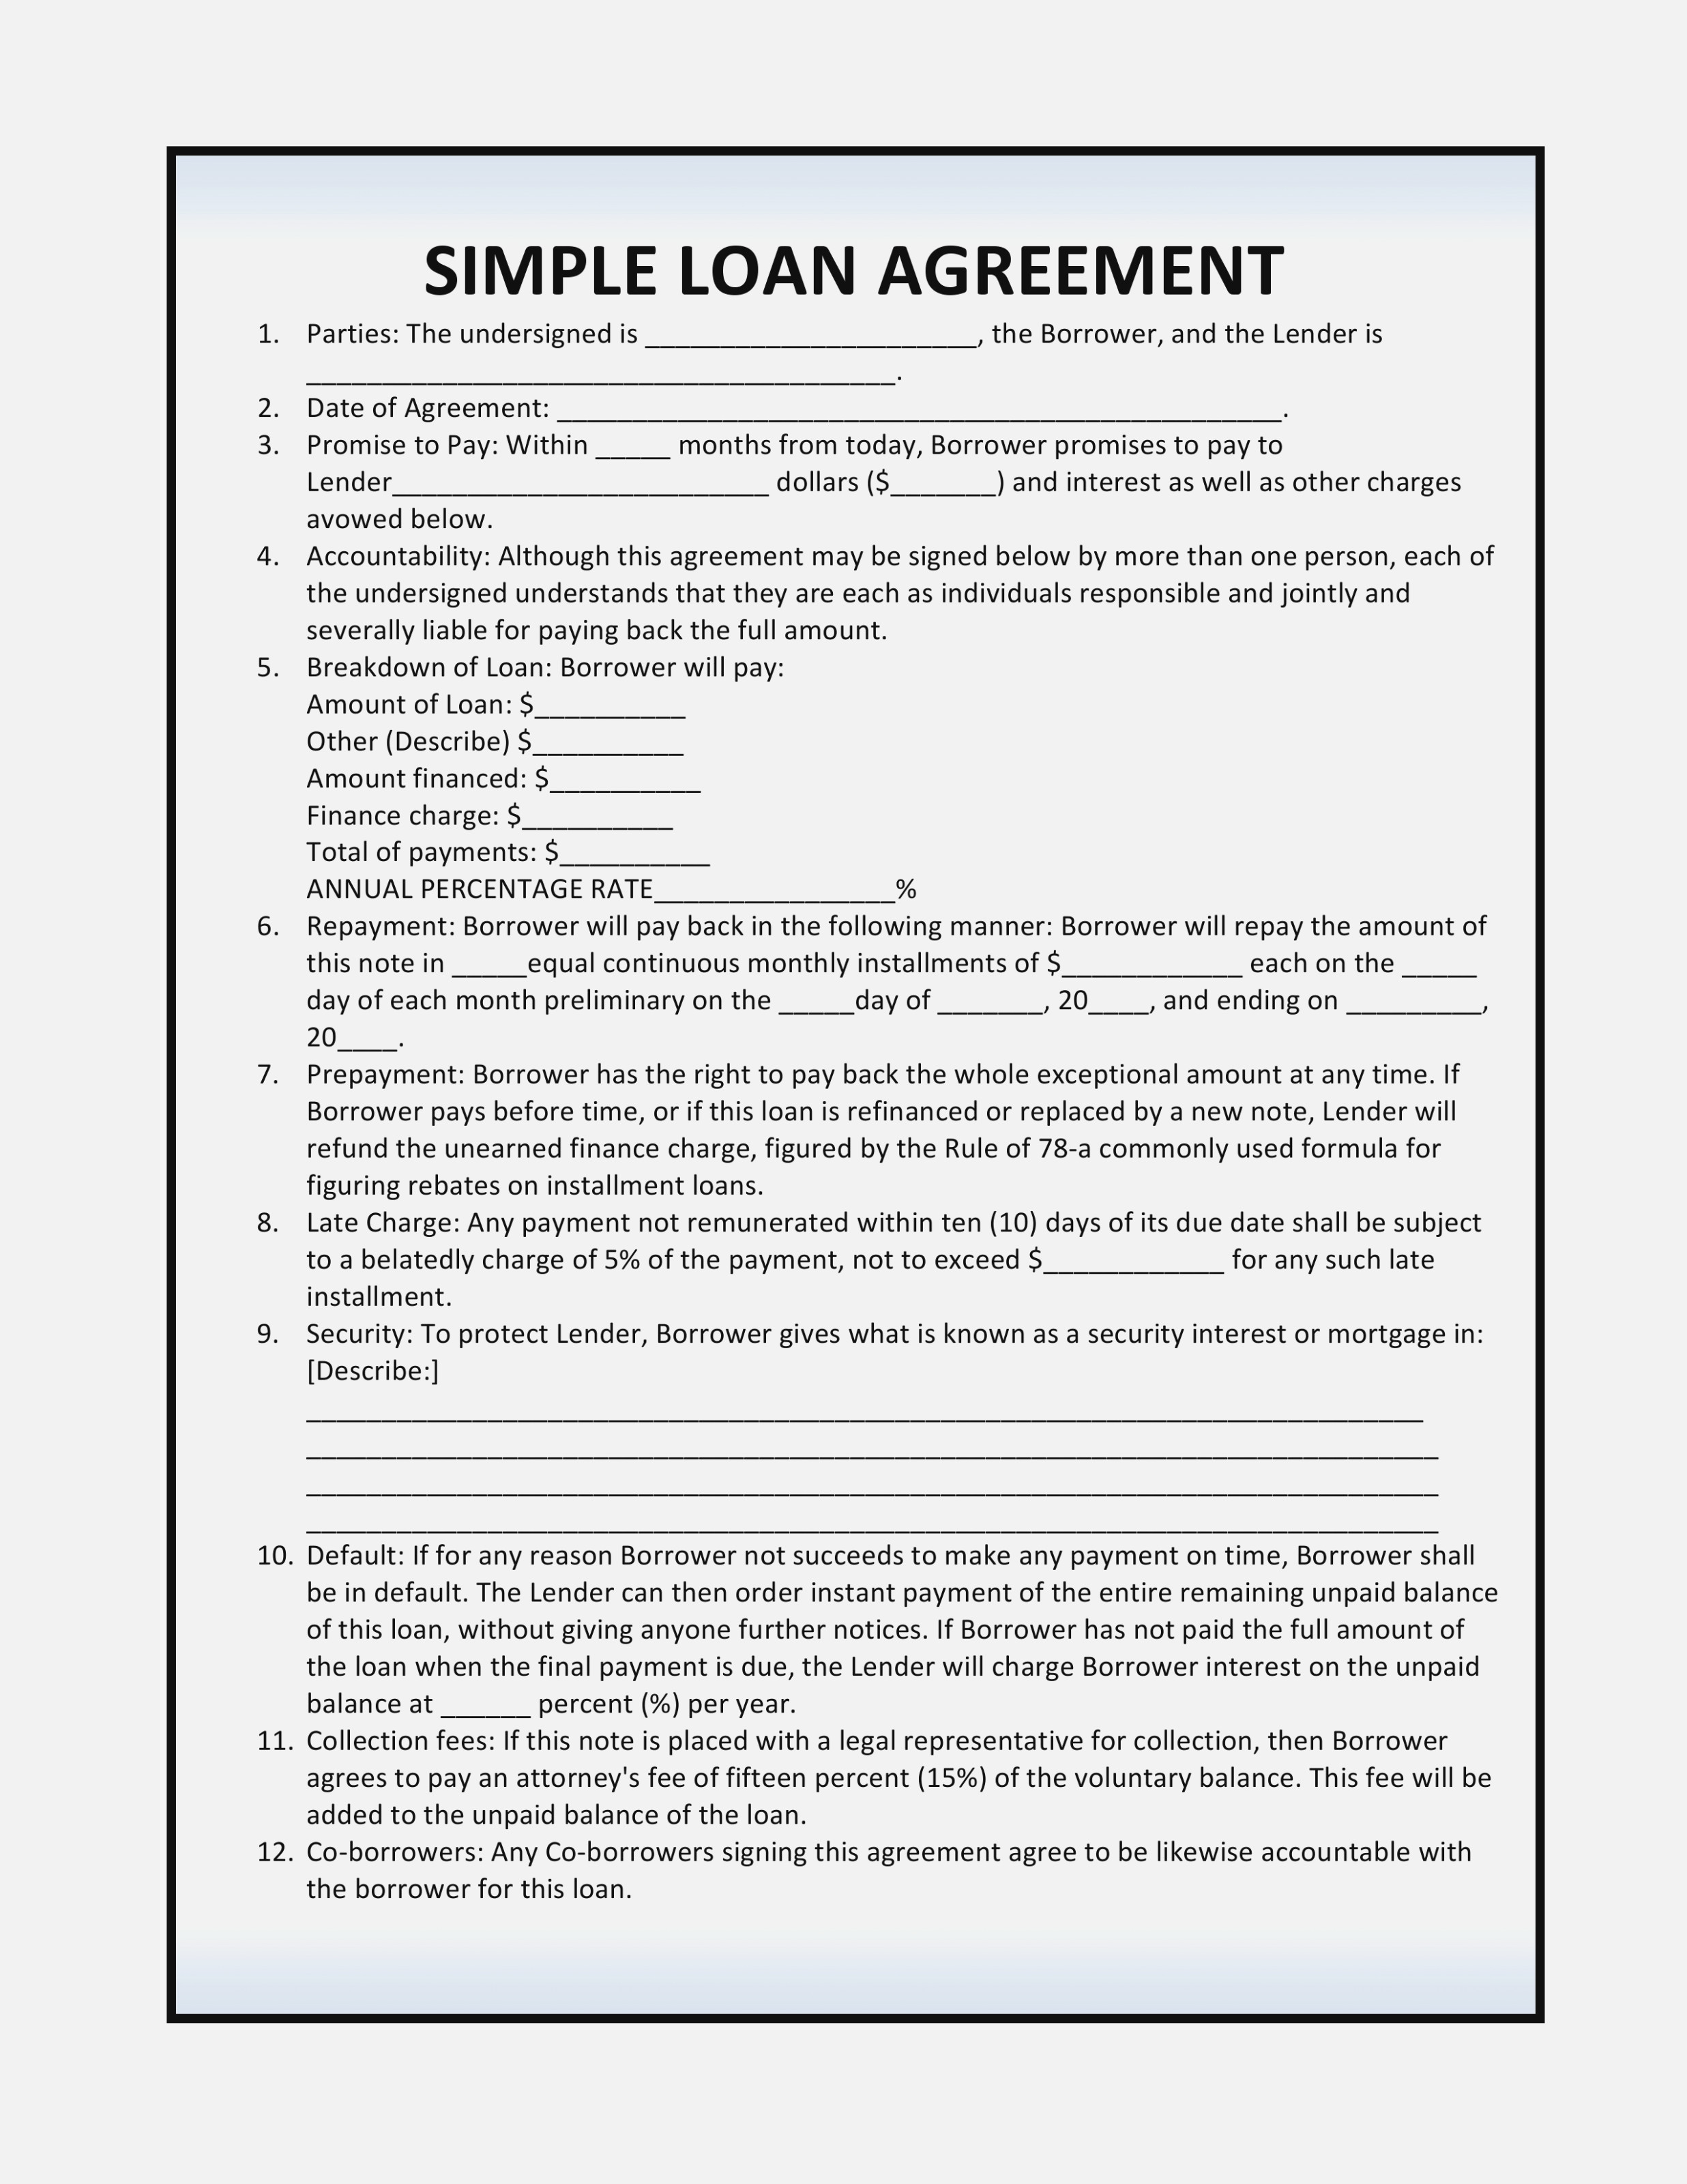 Personal Loan Agreement Template The 14 Reasons Tourists Realty Executives Mi Invoice And Resume